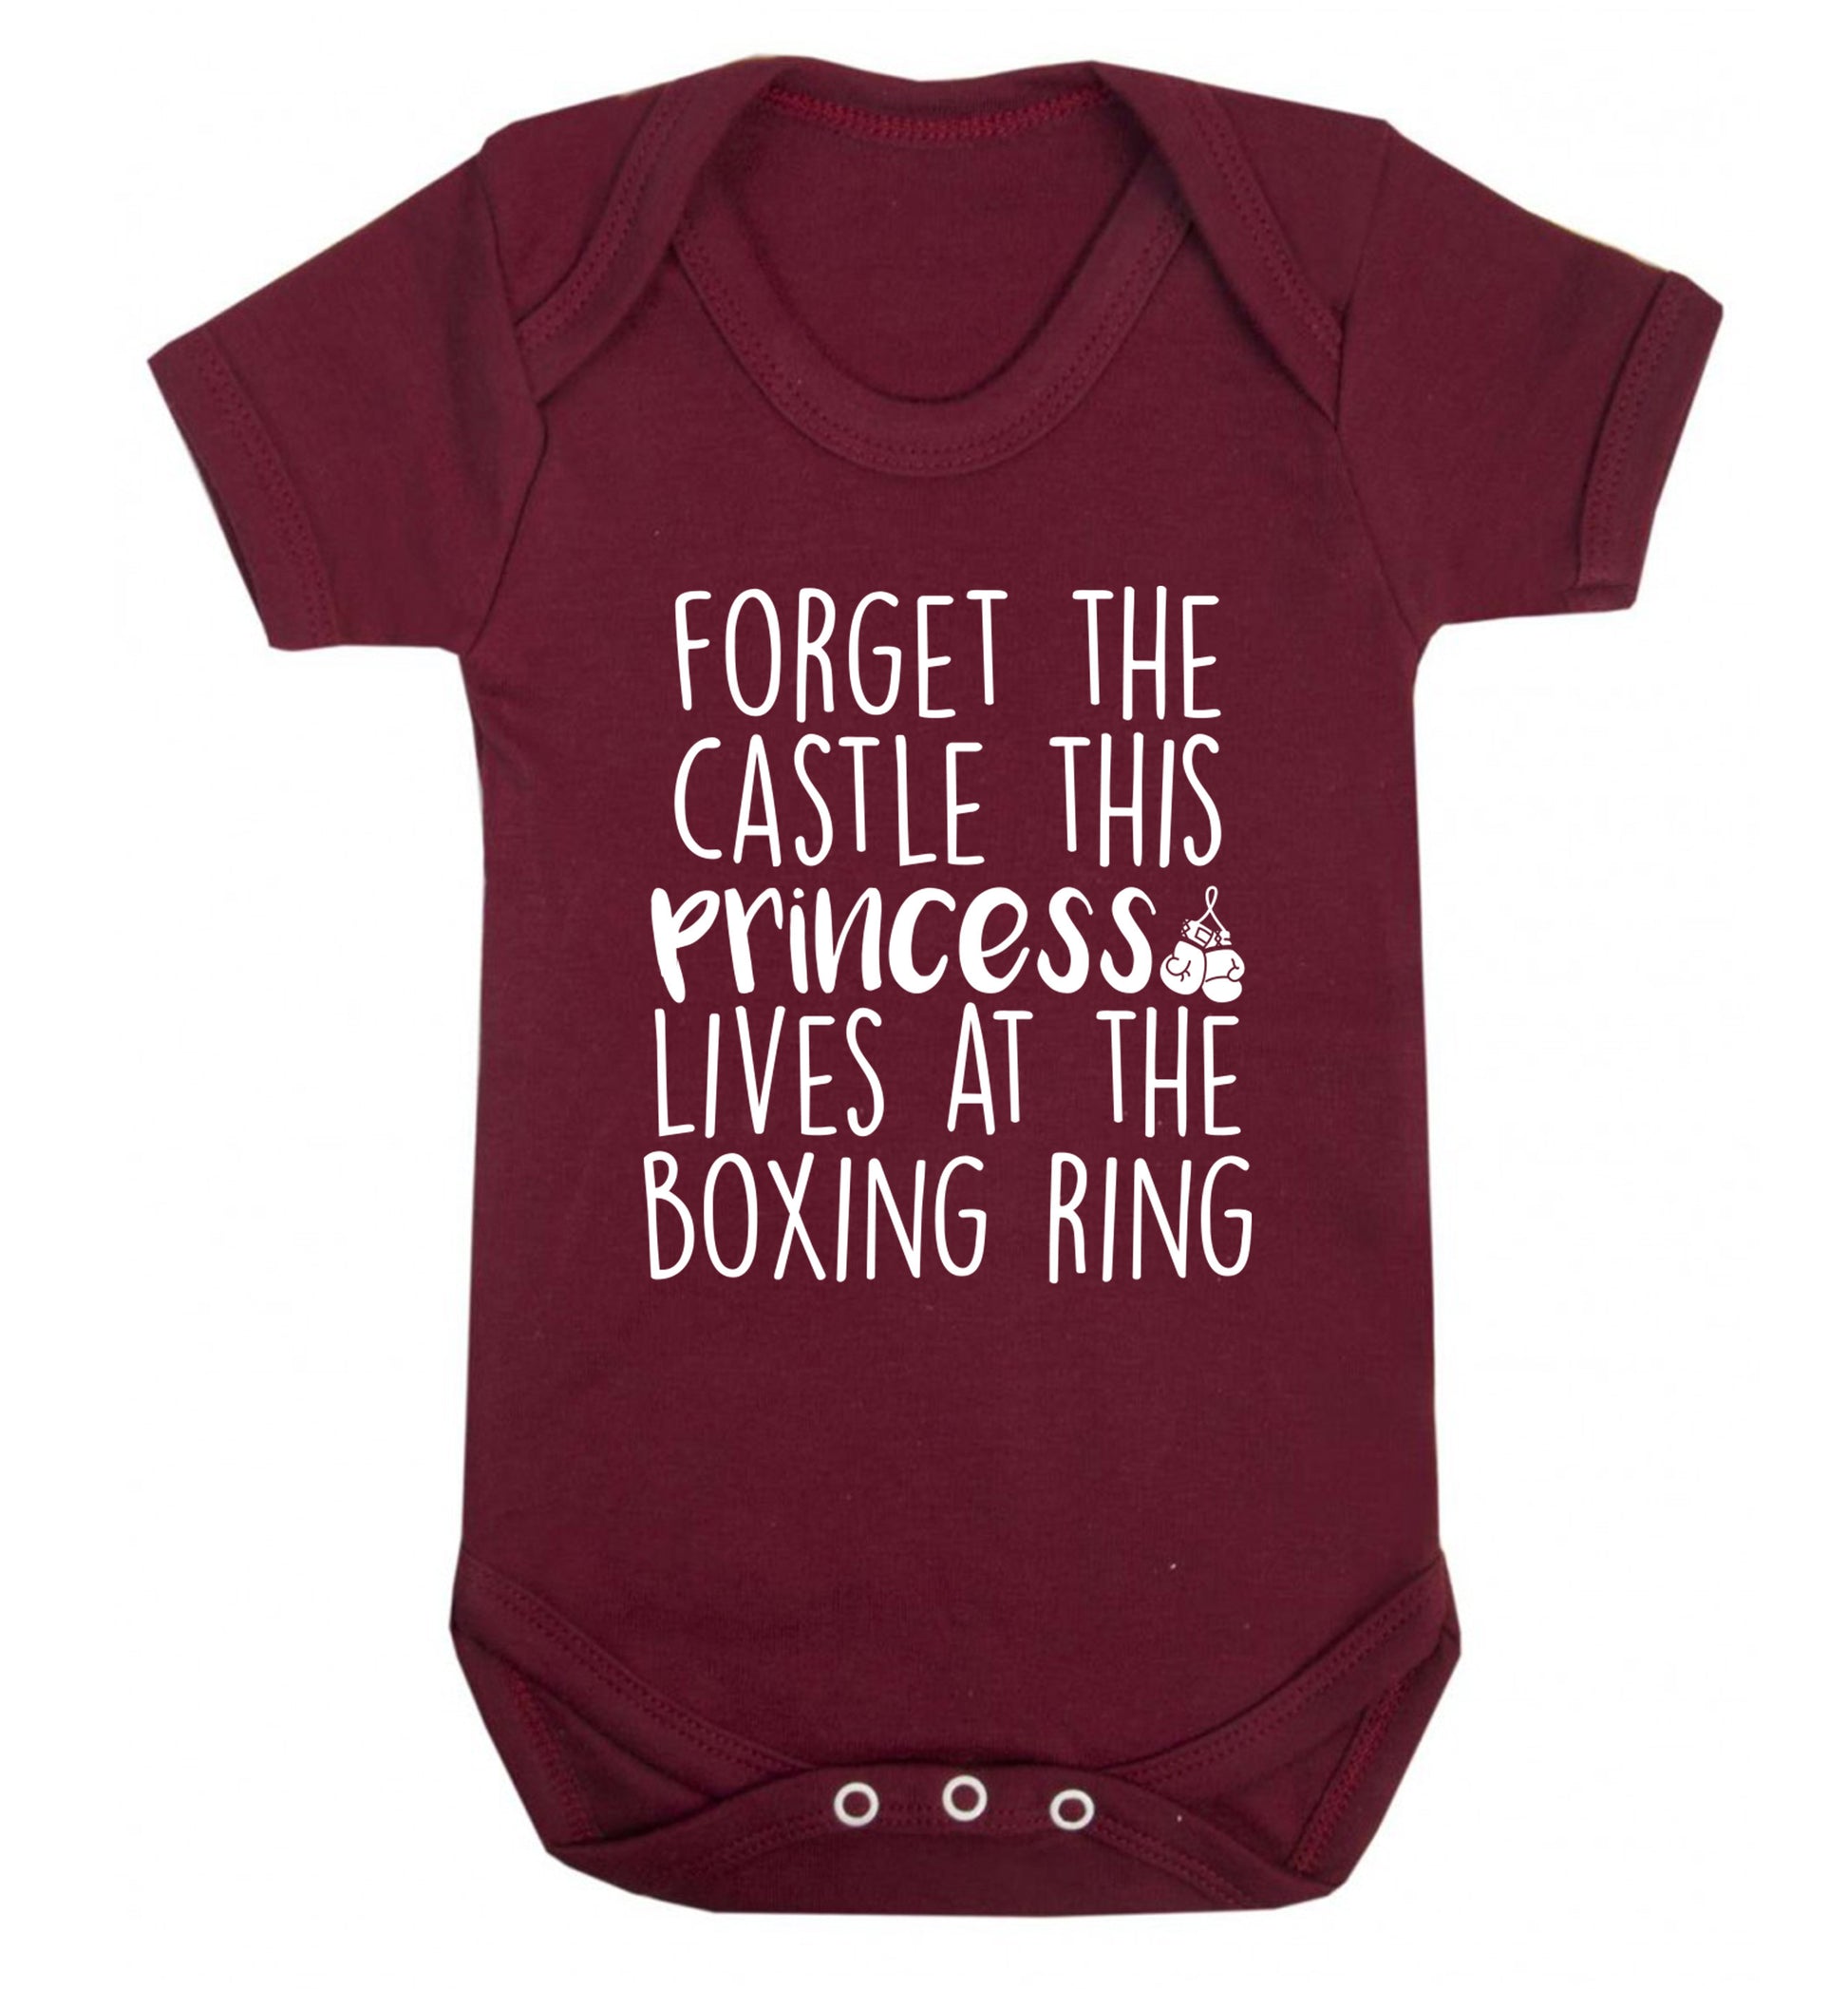 Forget the castle this princess lives at the boxing ring Baby Vest maroon 18-24 months